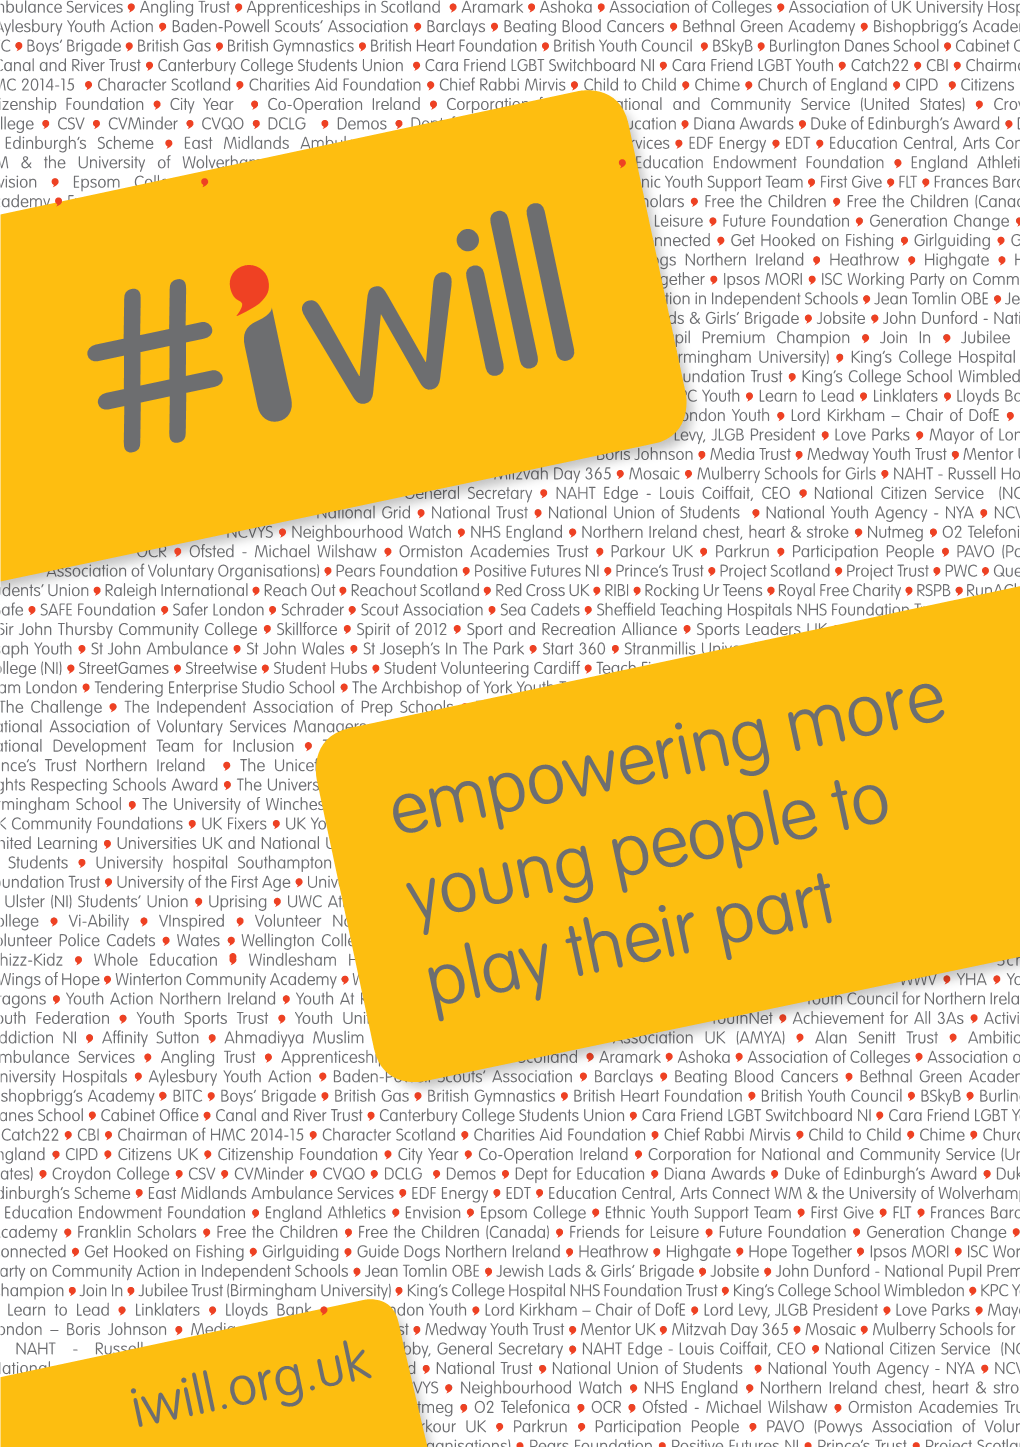 Empowering More Young People to Play Their Part